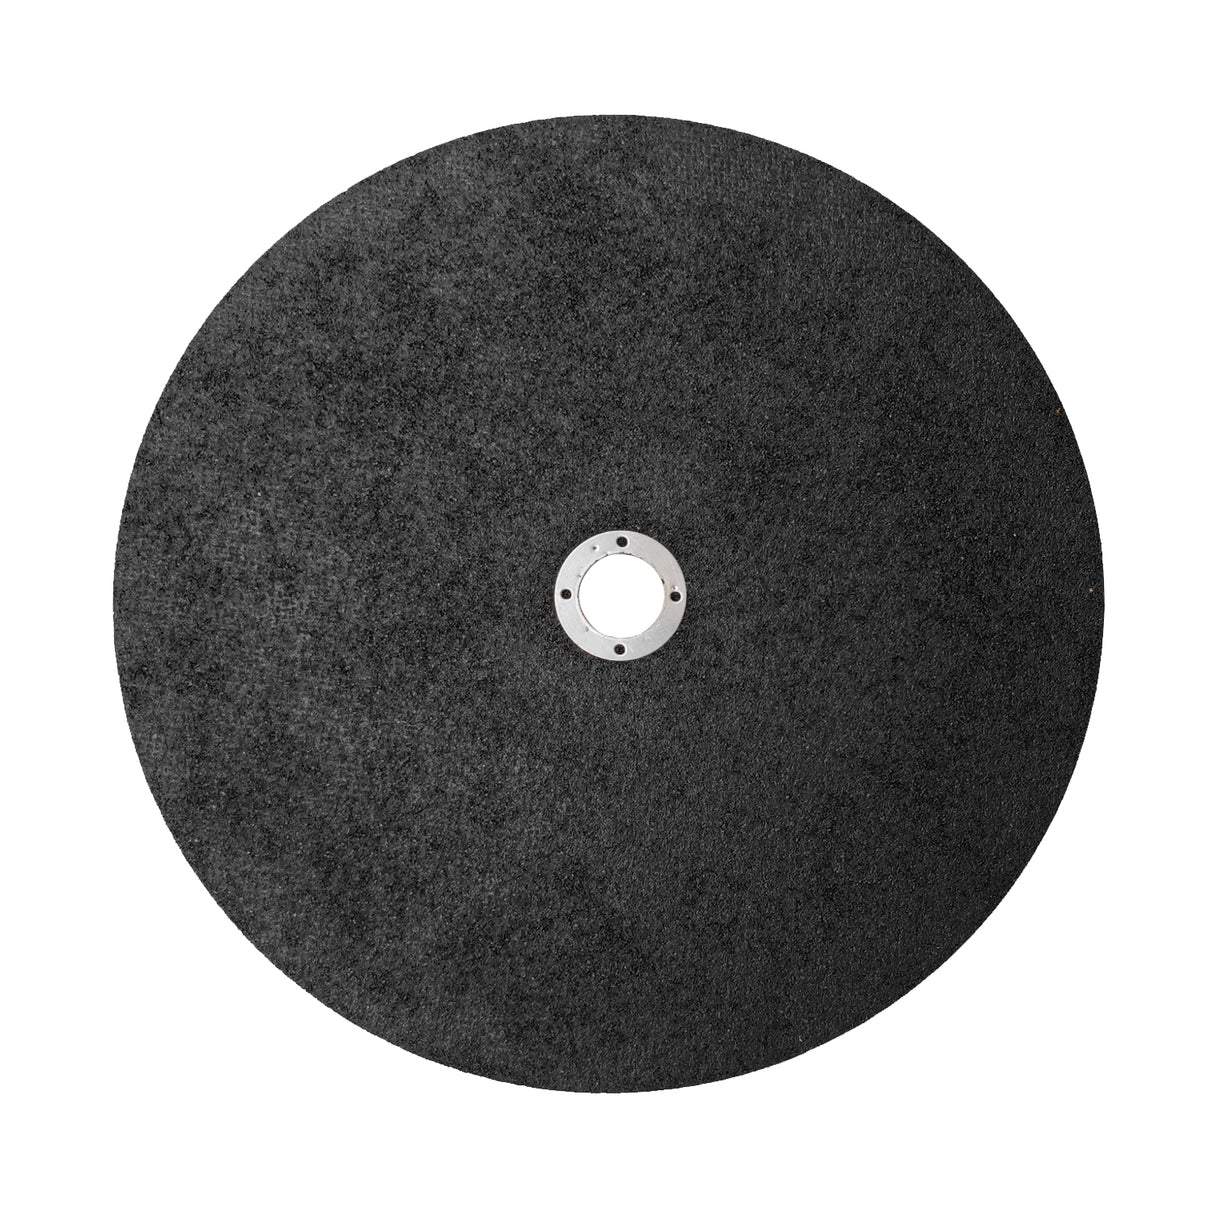 Kang Industrial Cut Off Saw Blade for TV-12